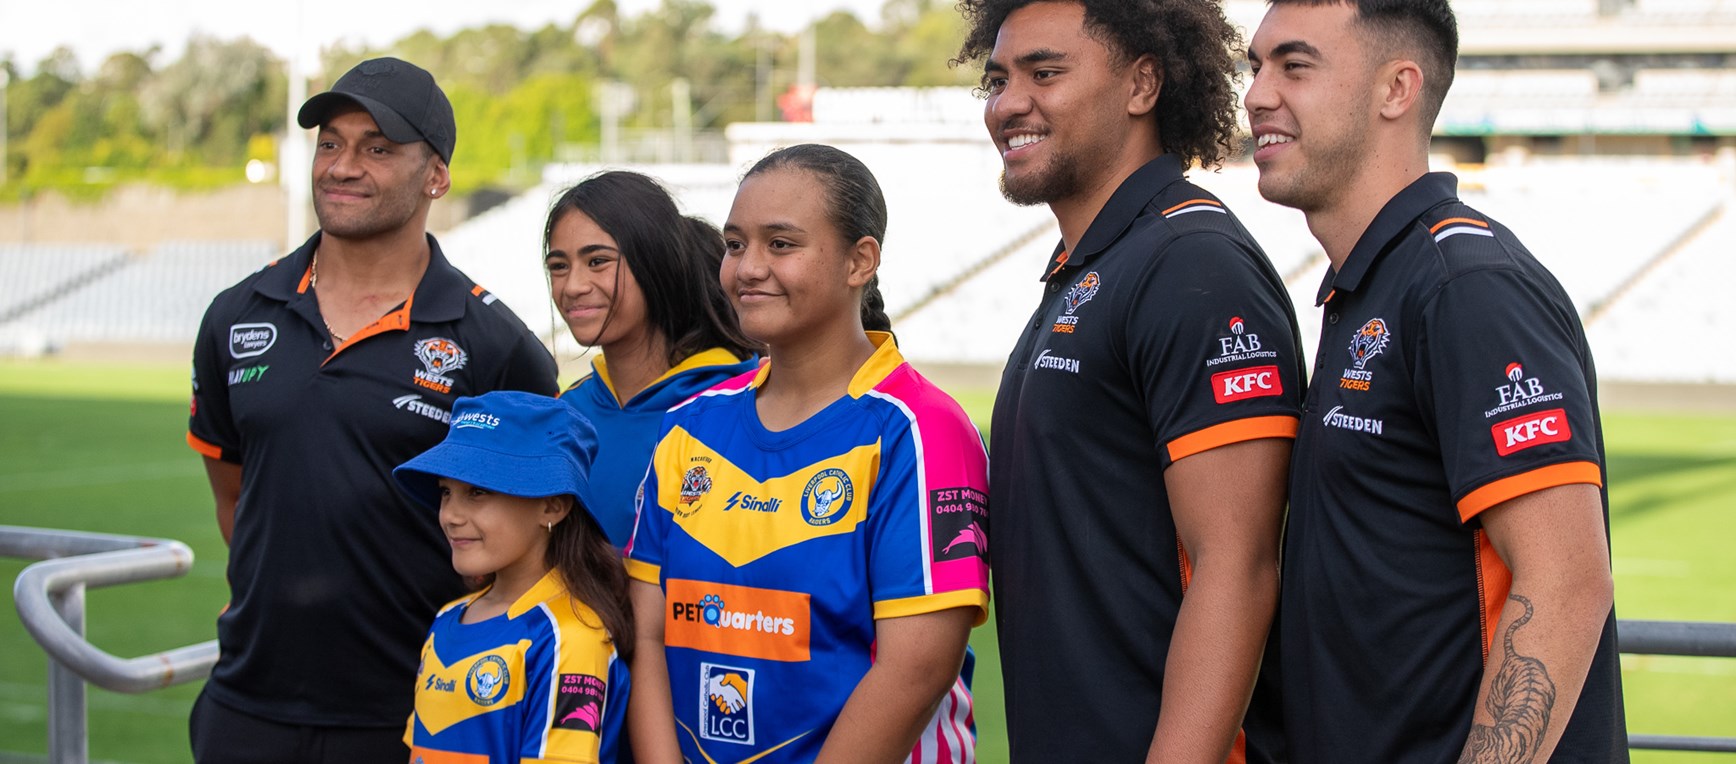 Gallery: Macarthur Junior Rugby League Launch